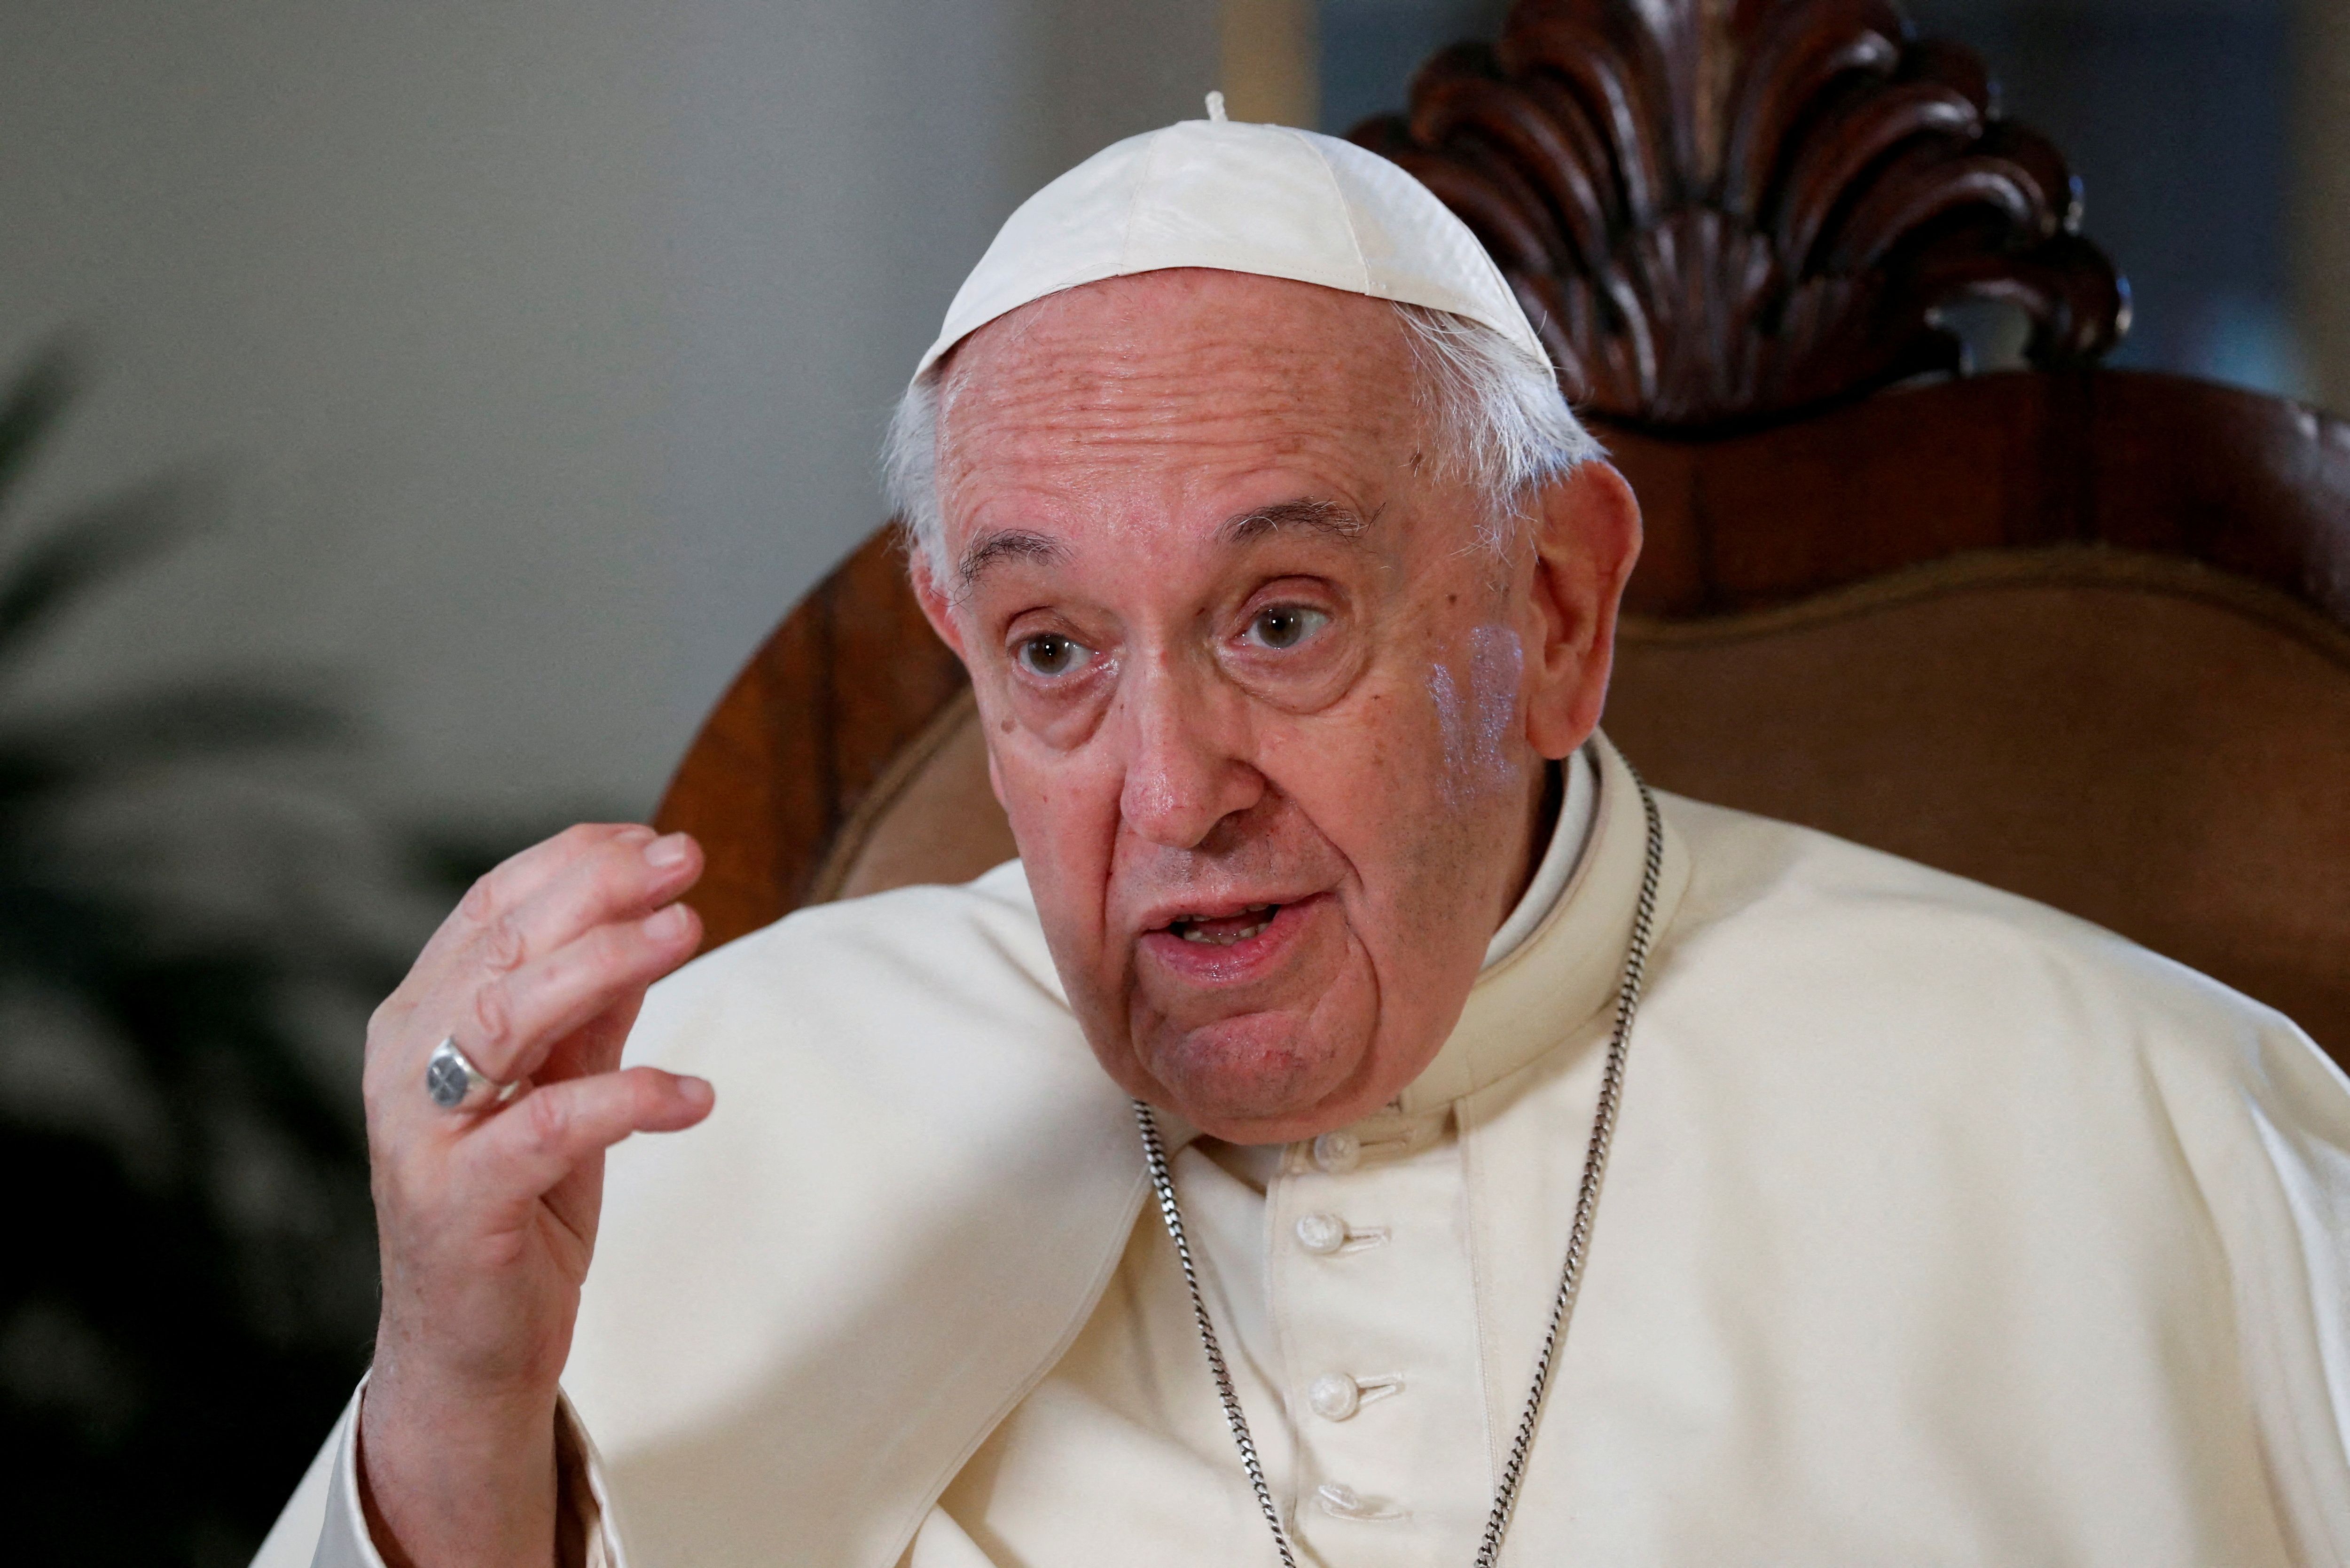 Pope Francis calls for studies into 'ugly' gender theory